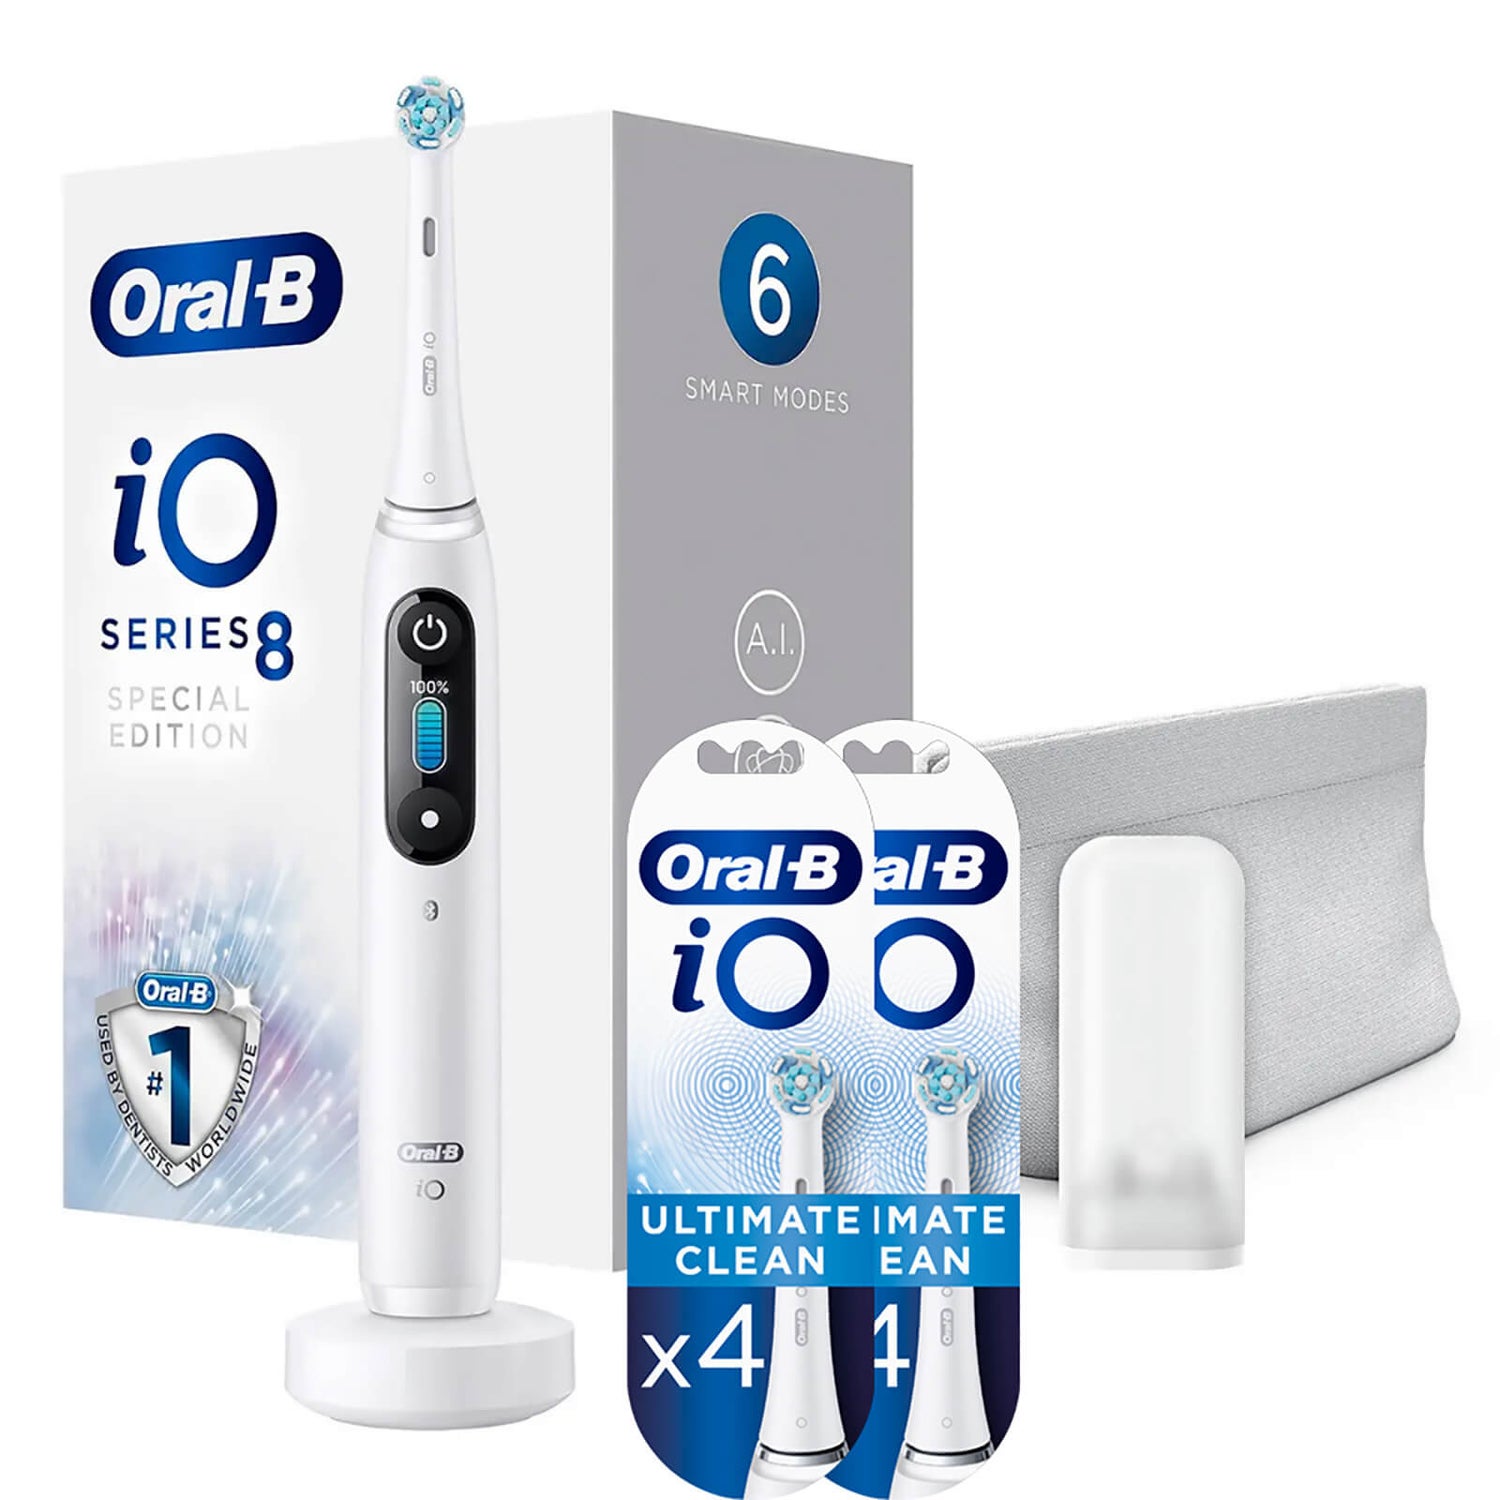 Oral B iO8 White Alabaster Special Edition Electric Toothbrush + 8 Refills